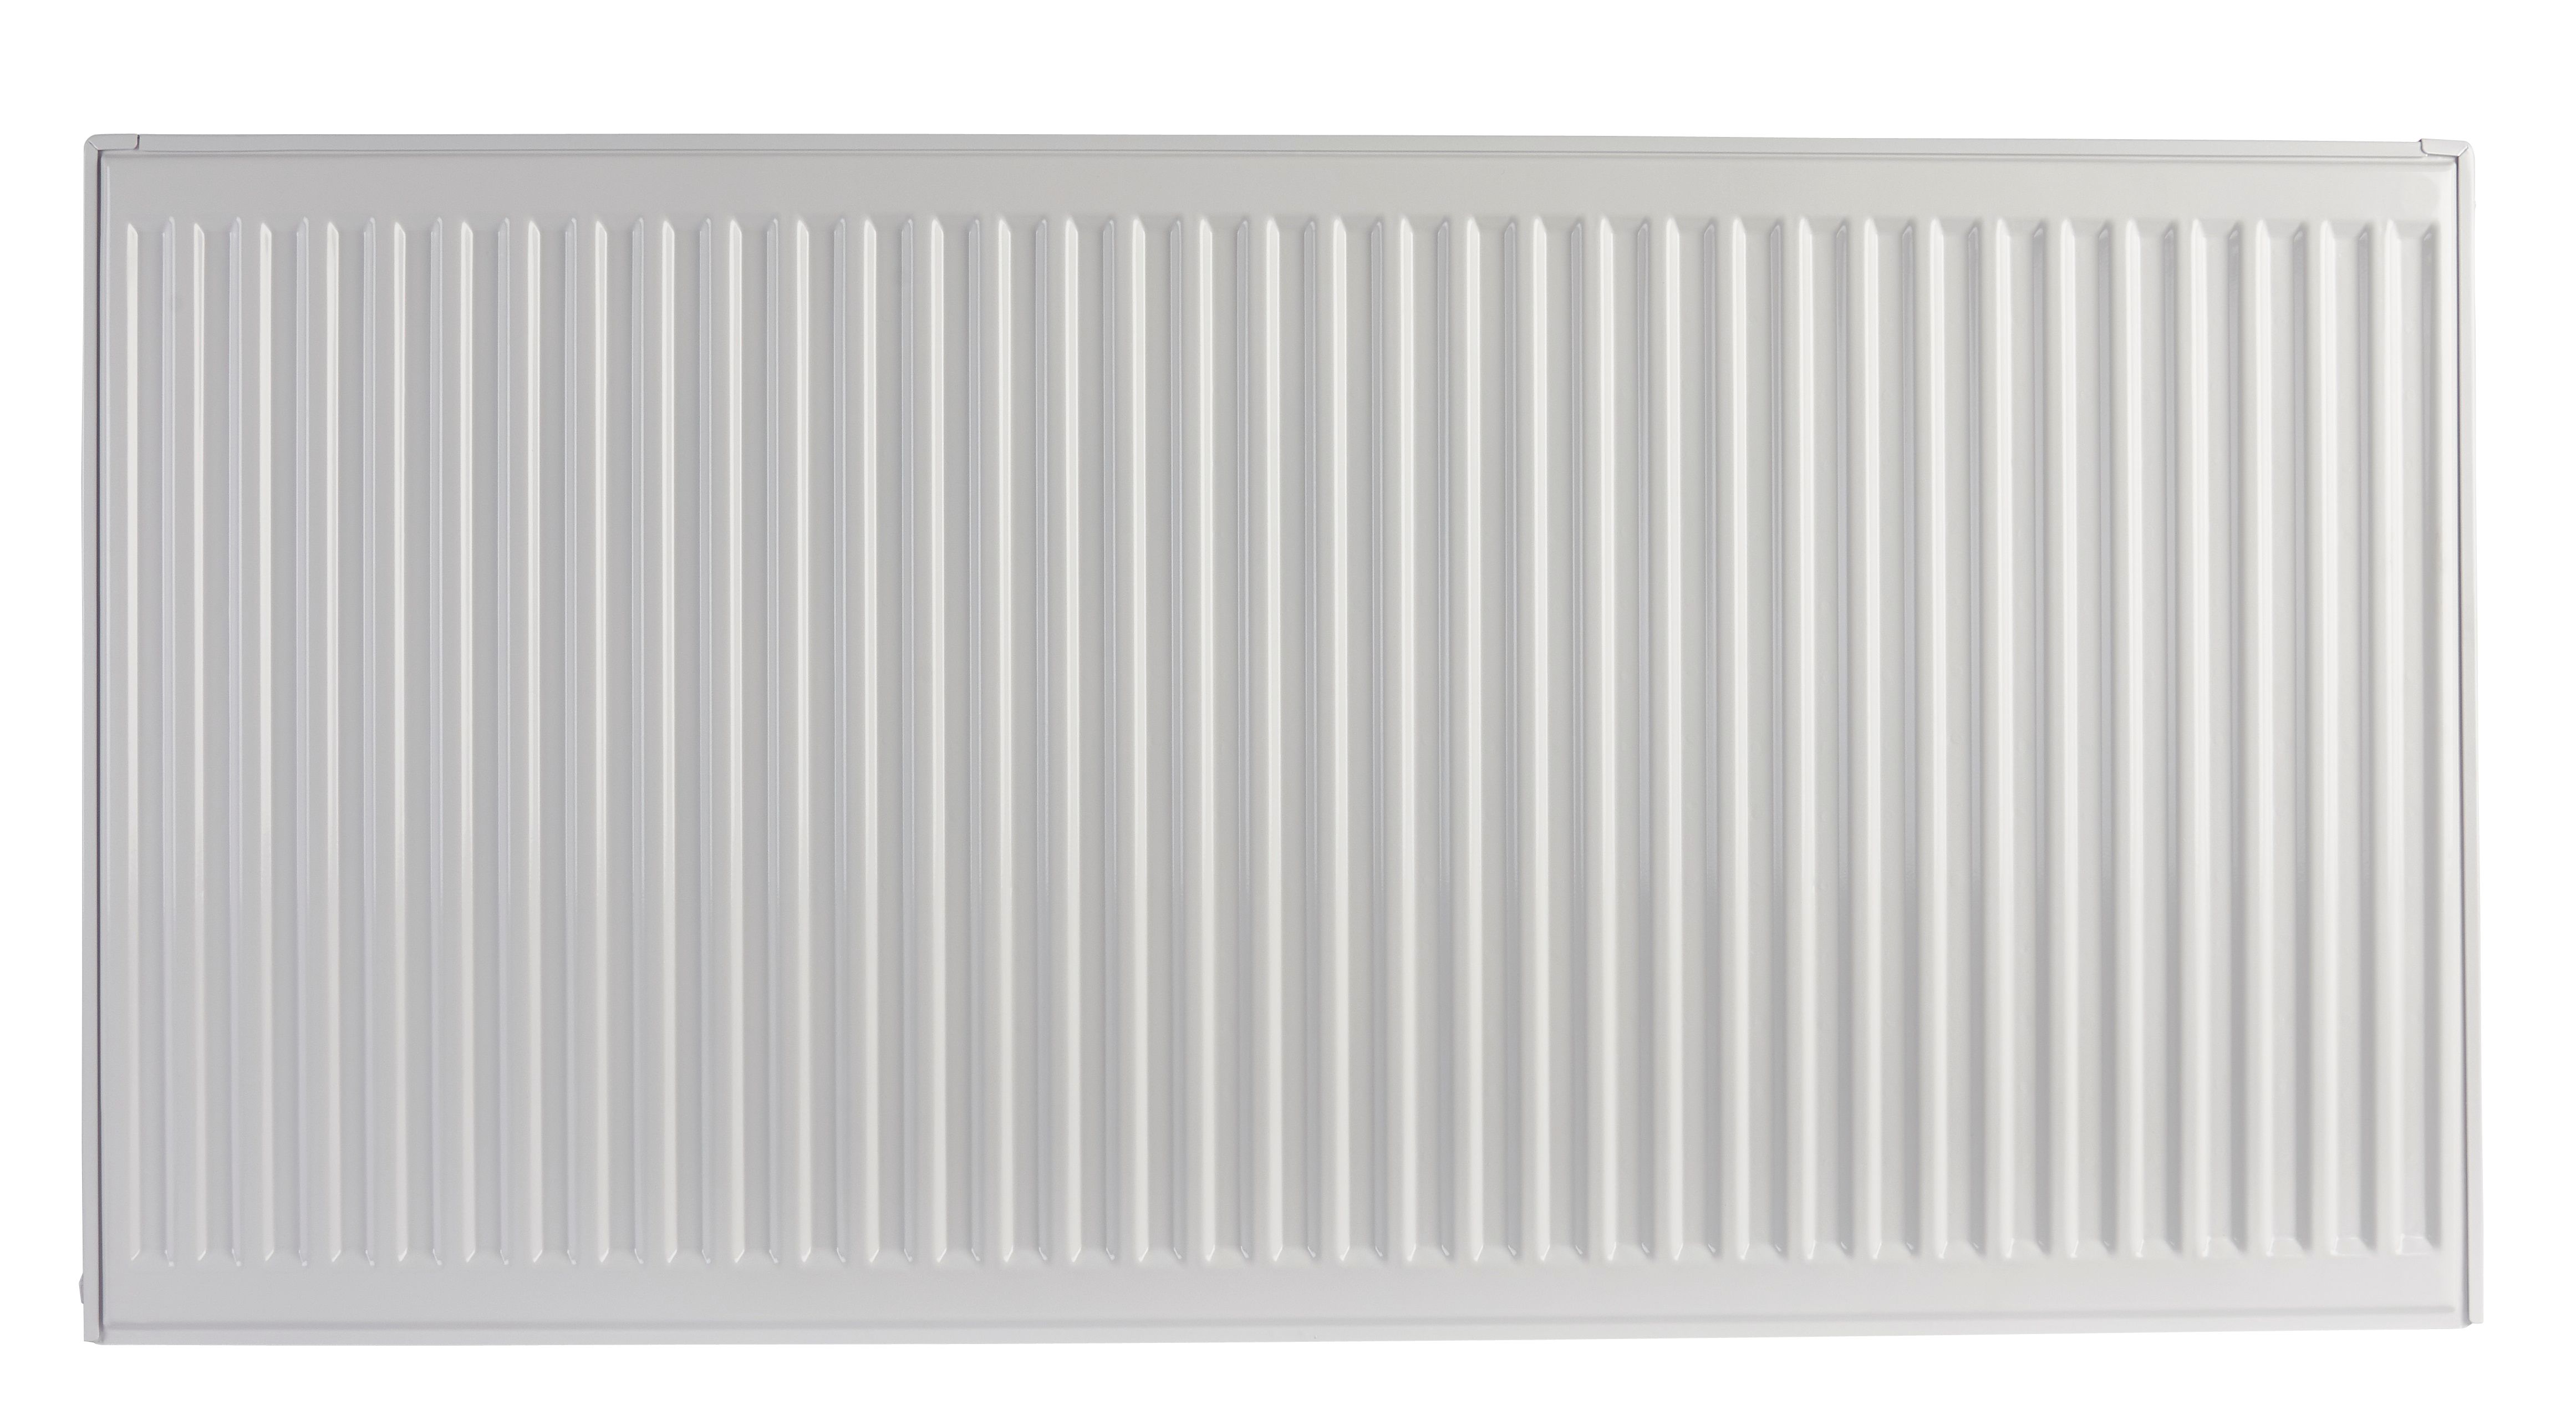 Image of Homeline by Stelrad 600 x 1000mm Type 21 Double Panel Plus Single Convector Radiator